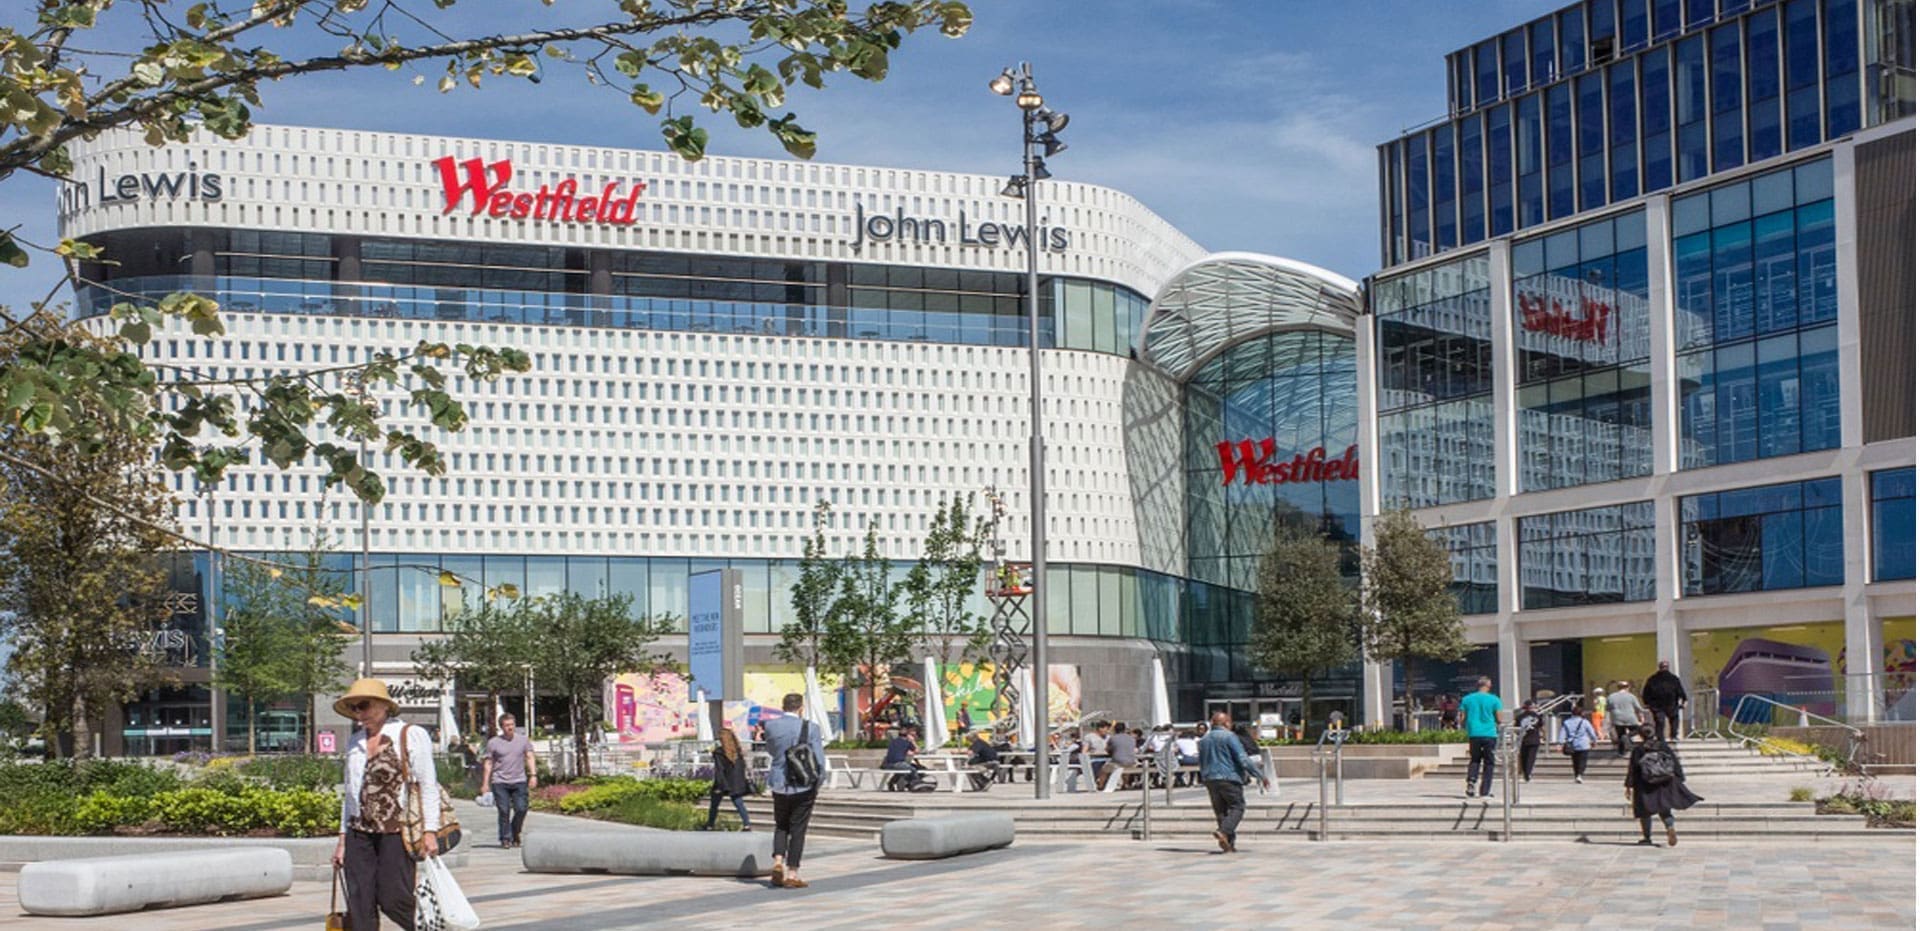 Westfield shopping centres - Shopping 